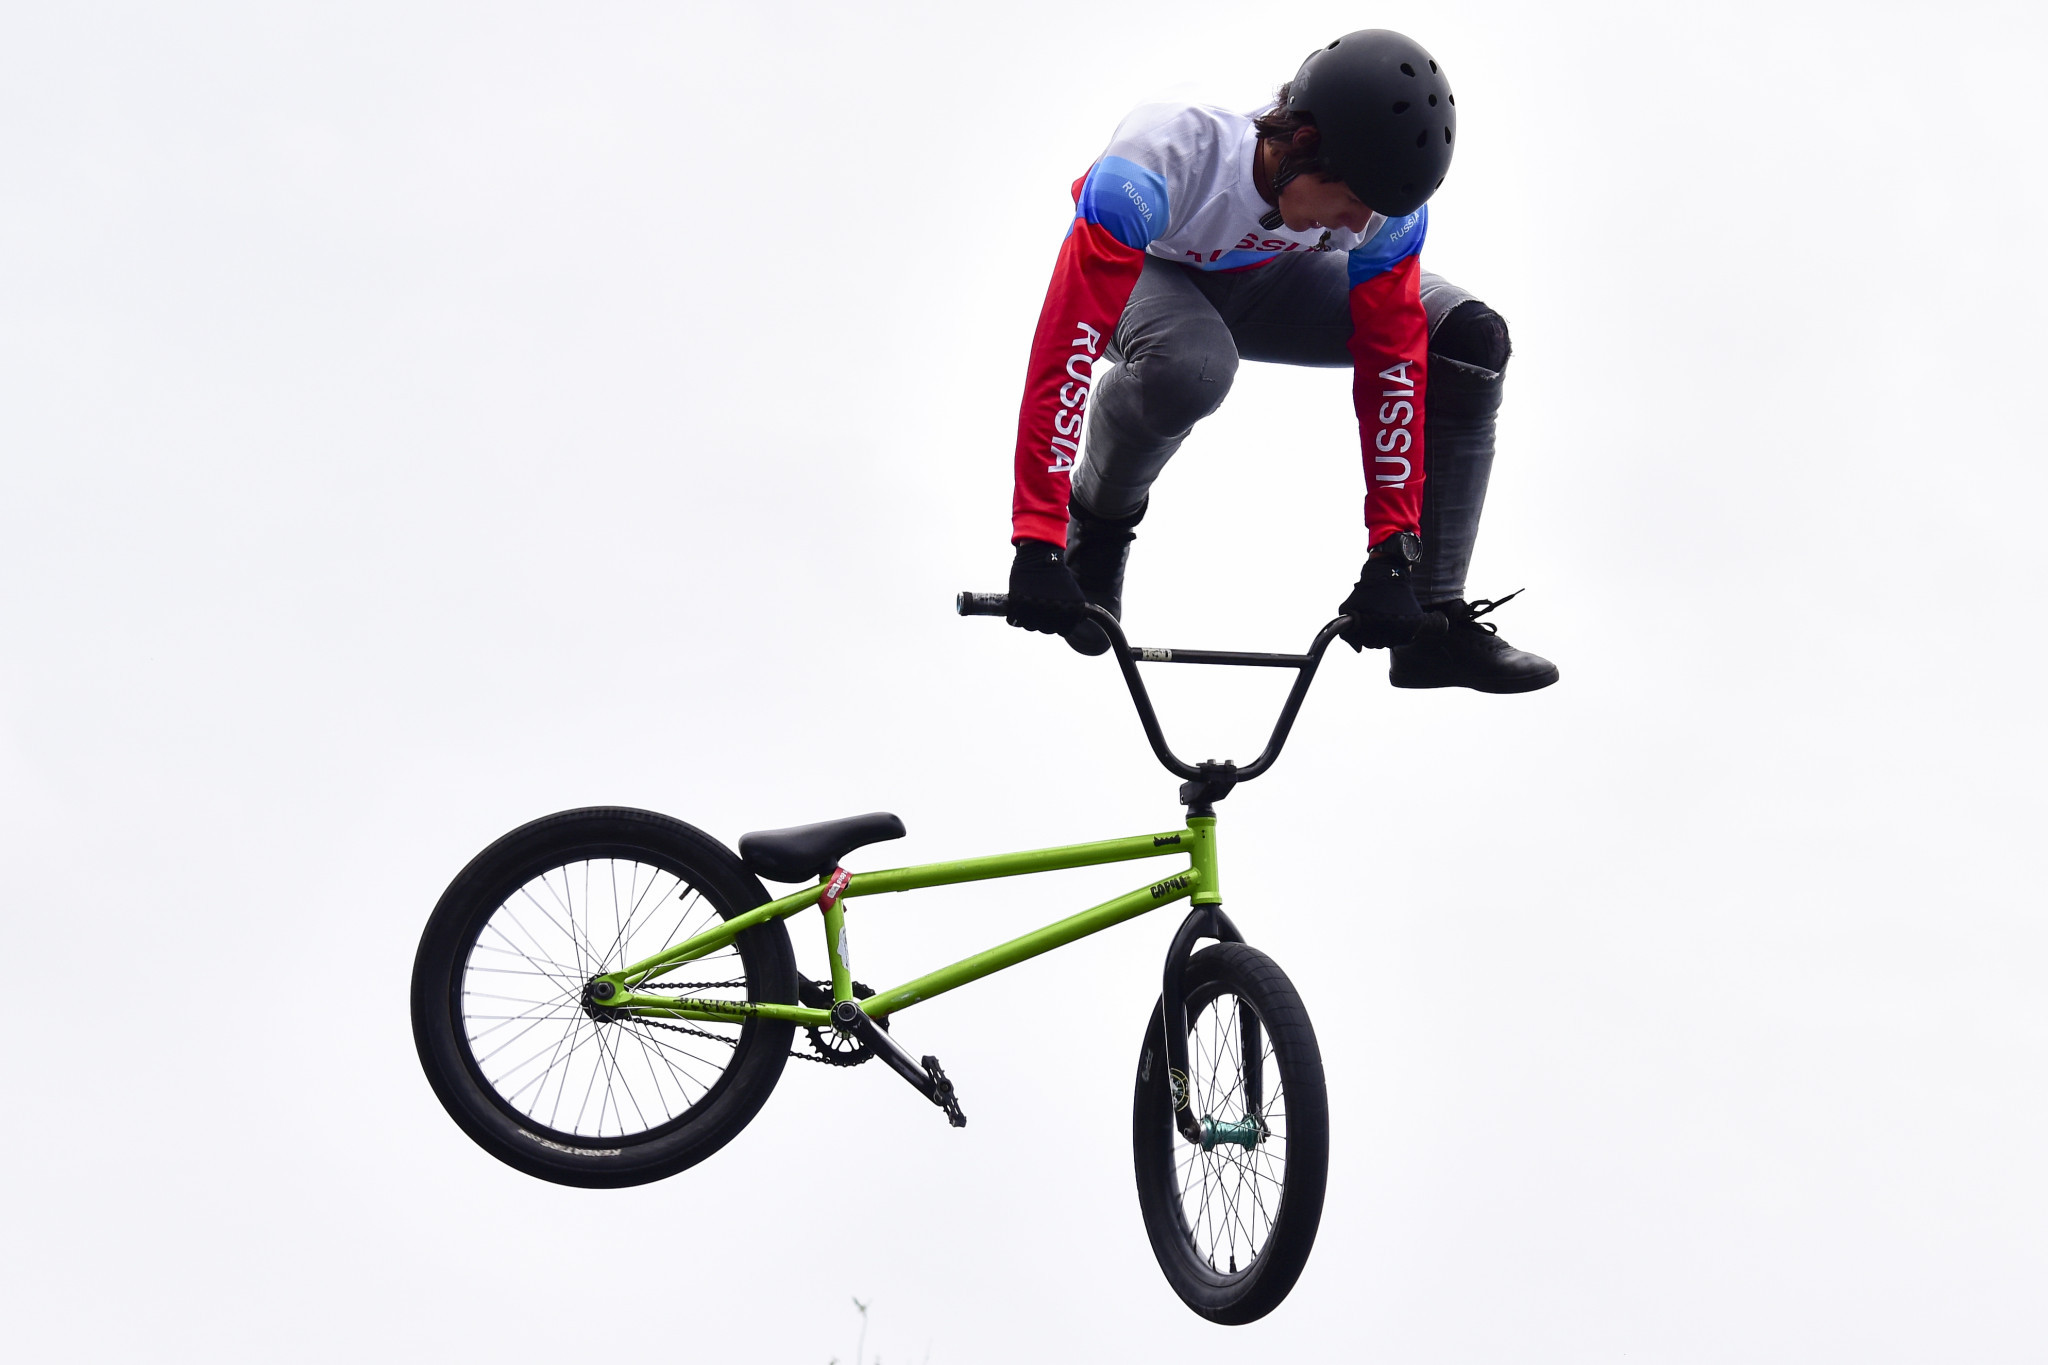 BMX freestyle is one of the sports due to feature at the first World Urban Games in Budapest ©Getty Images